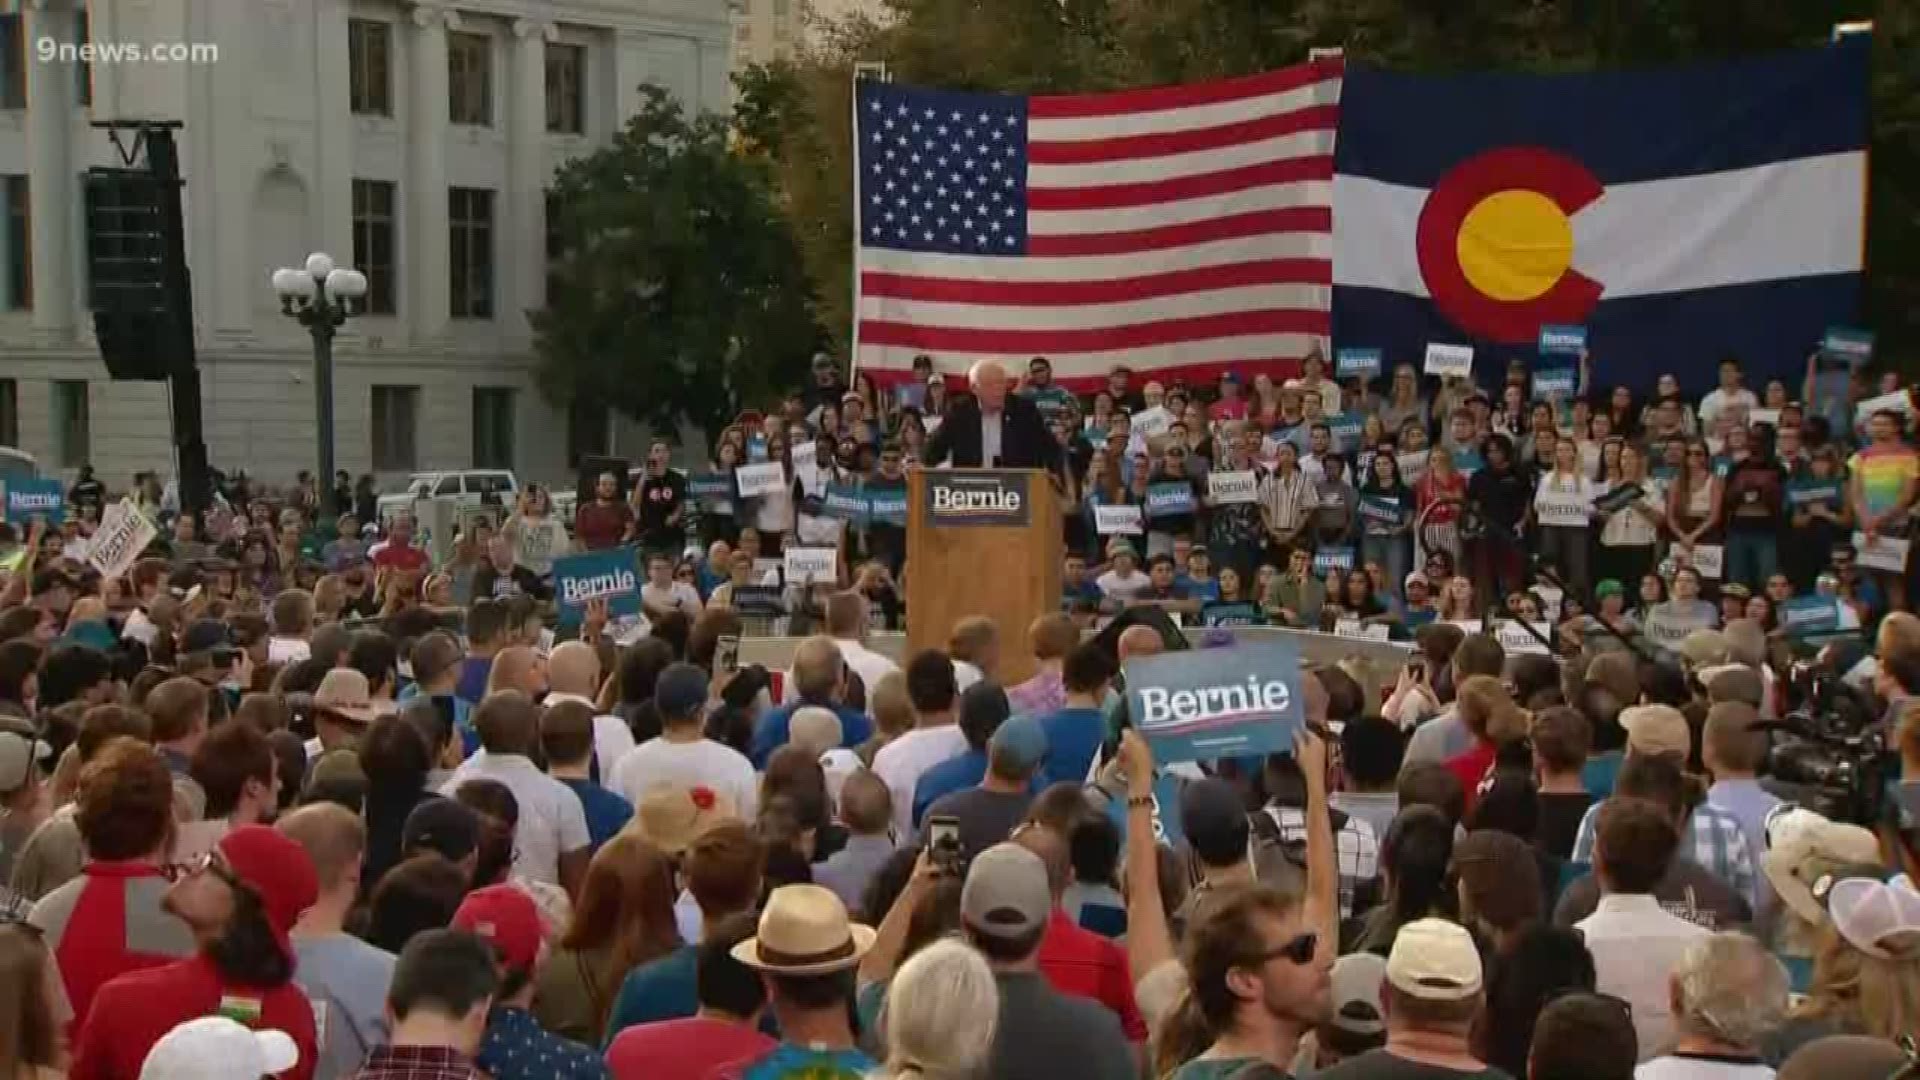 Sanders hosted a campaign rally in Denver's Civic Center Park on Monday evening to share his message. He hopes to become the Democratic party nominee for president in 2020.